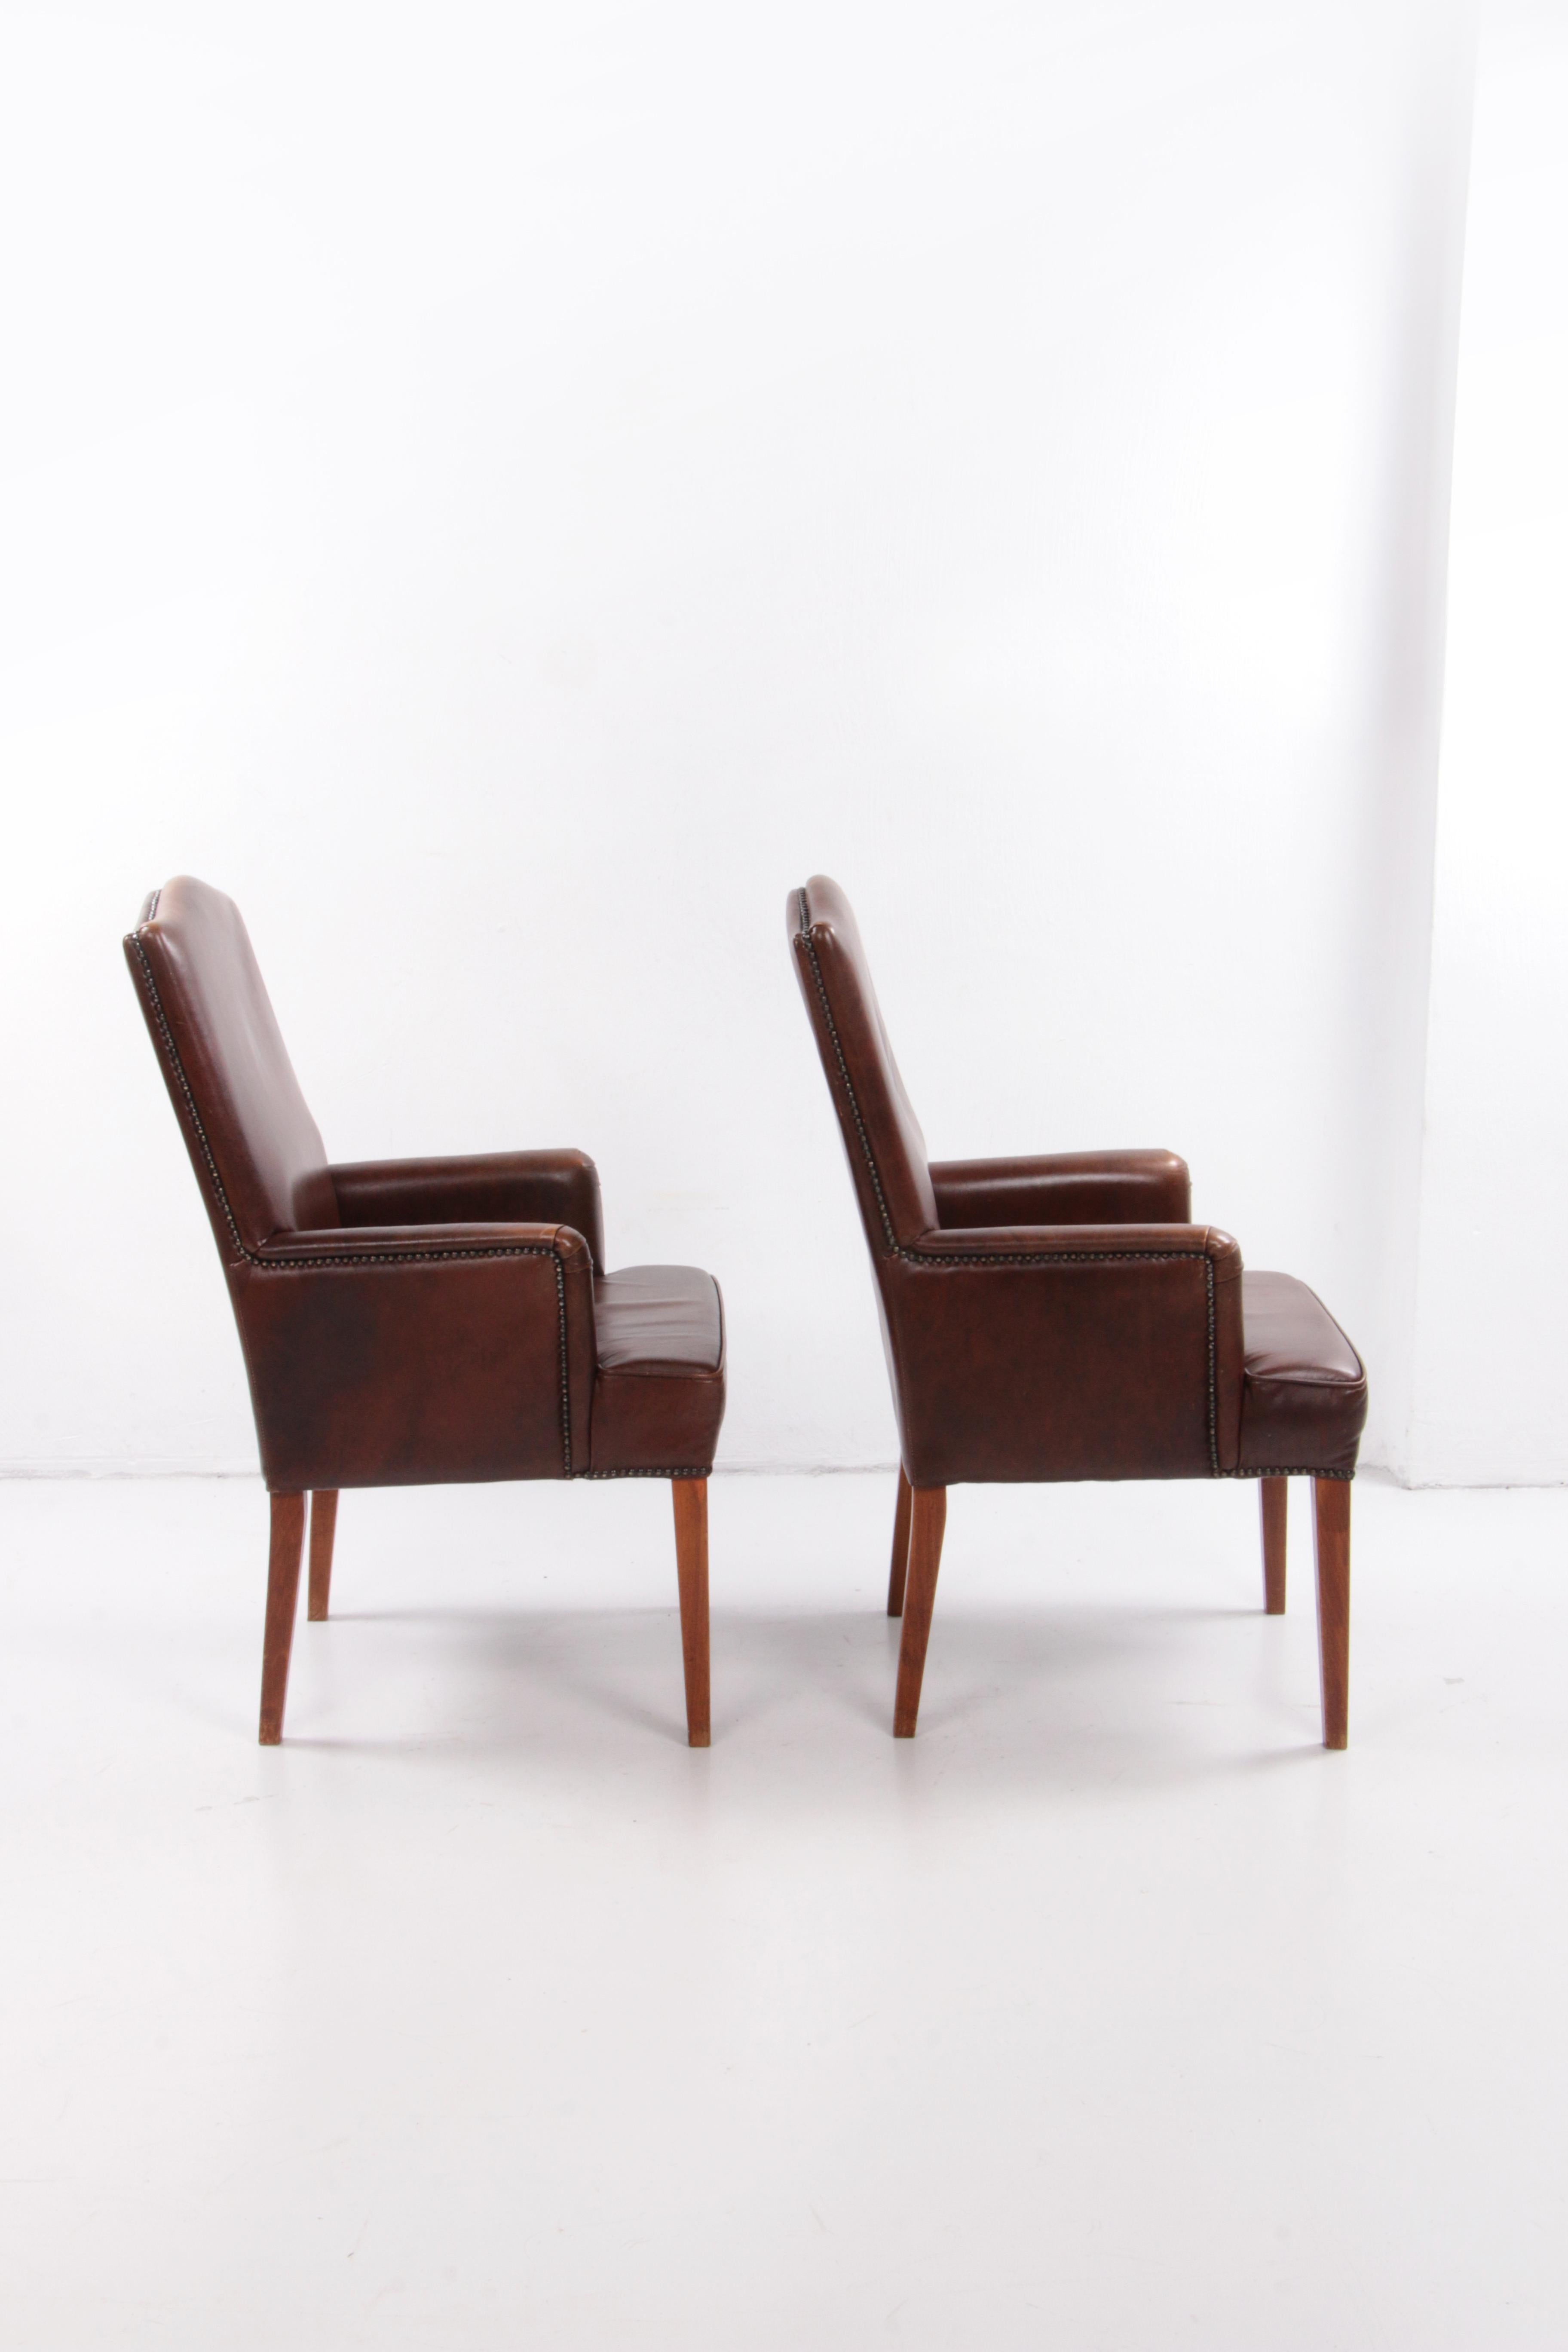 Late 20th Century Set of 2 dining room chairs in sheep leather, 1970 Netherlands. For Sale